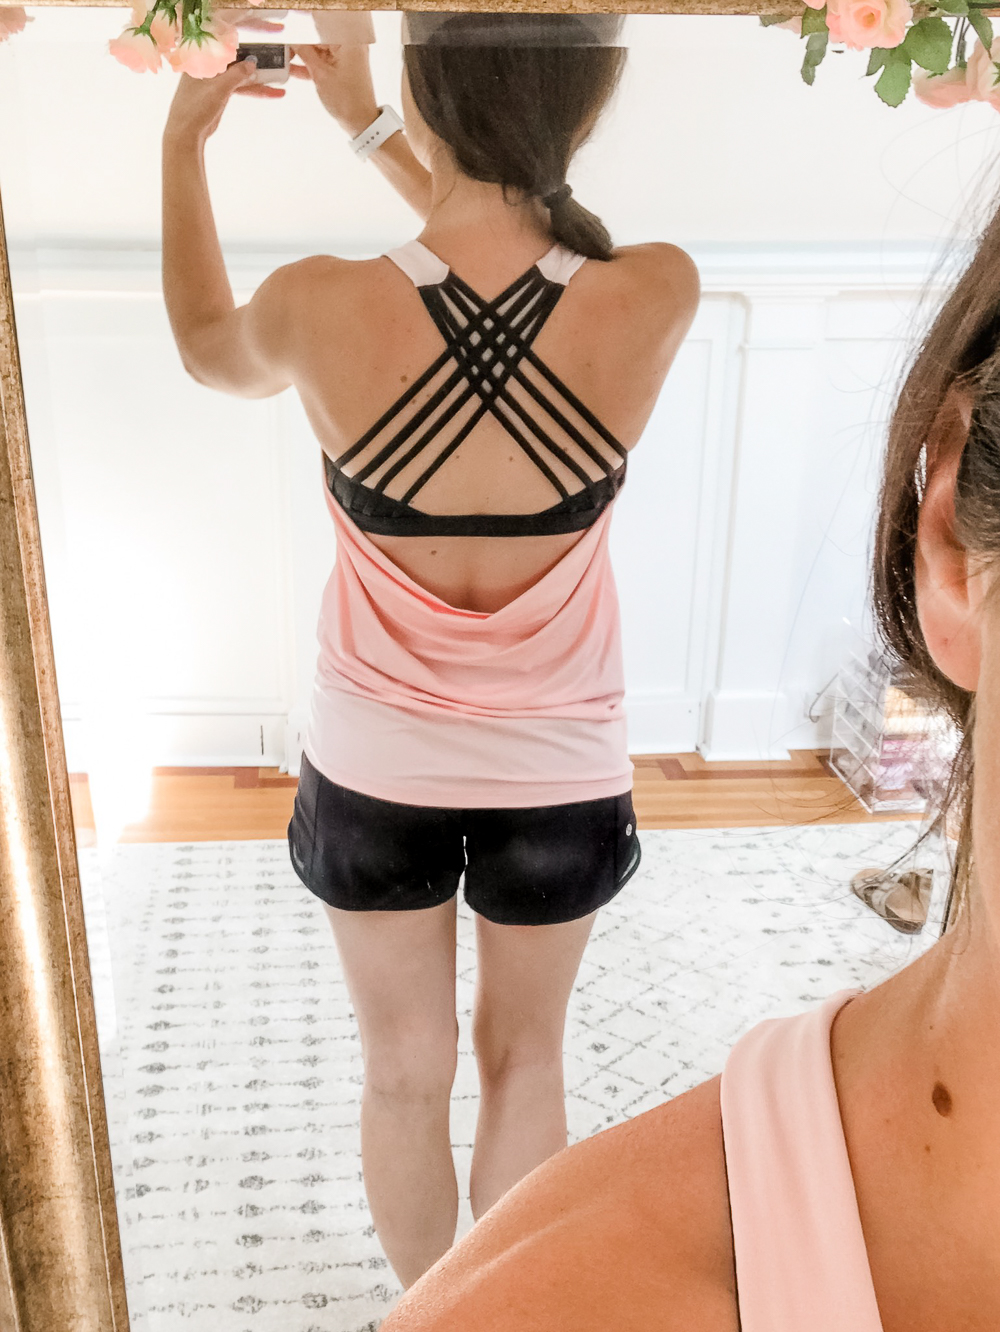 Amazon IcyZone Yoga Top with Built-In Bra, Amazon Prime Day Try-On Haul: Top Affordable Fashion Finds